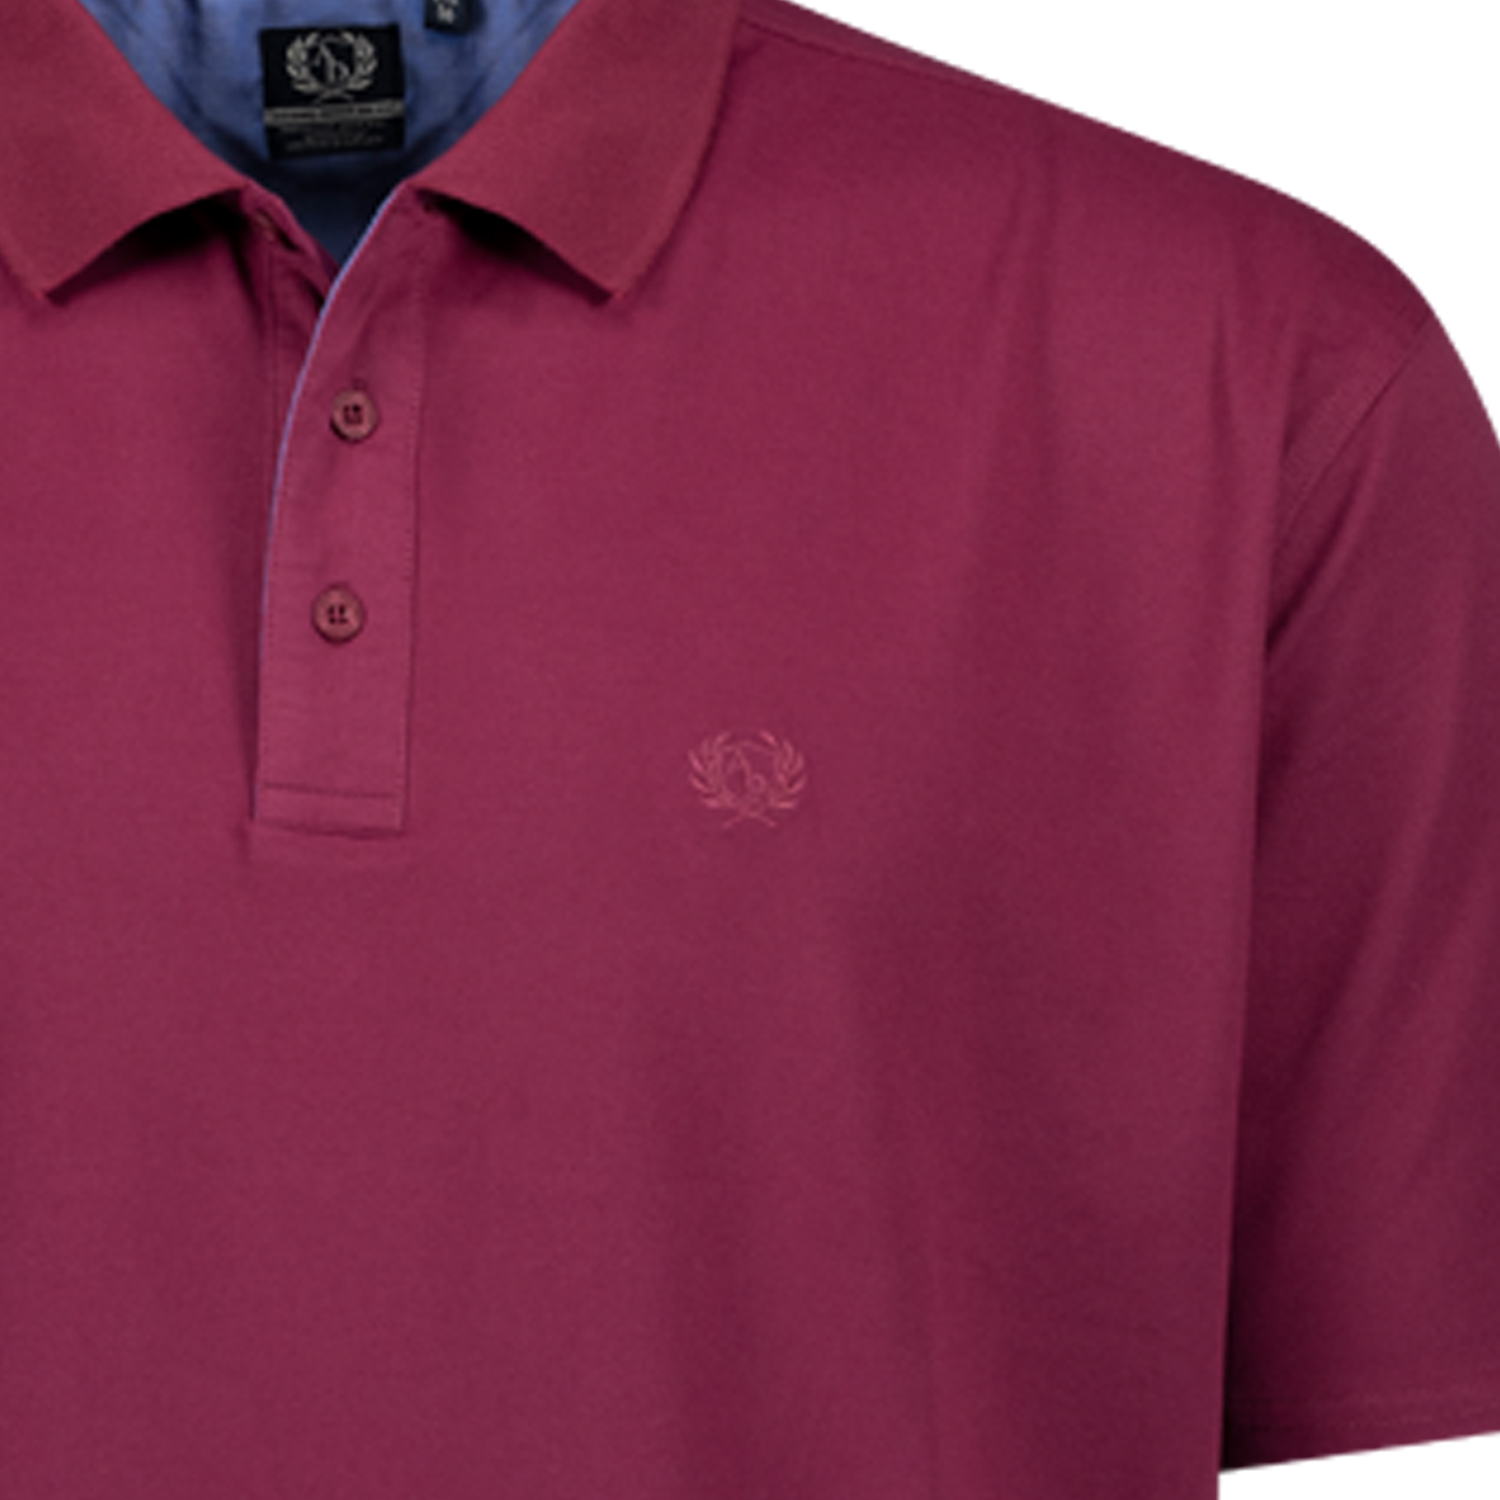 Short sleeve polo shirt PICCO by ADAMO in blackberry for men in large sizes up to 12XL